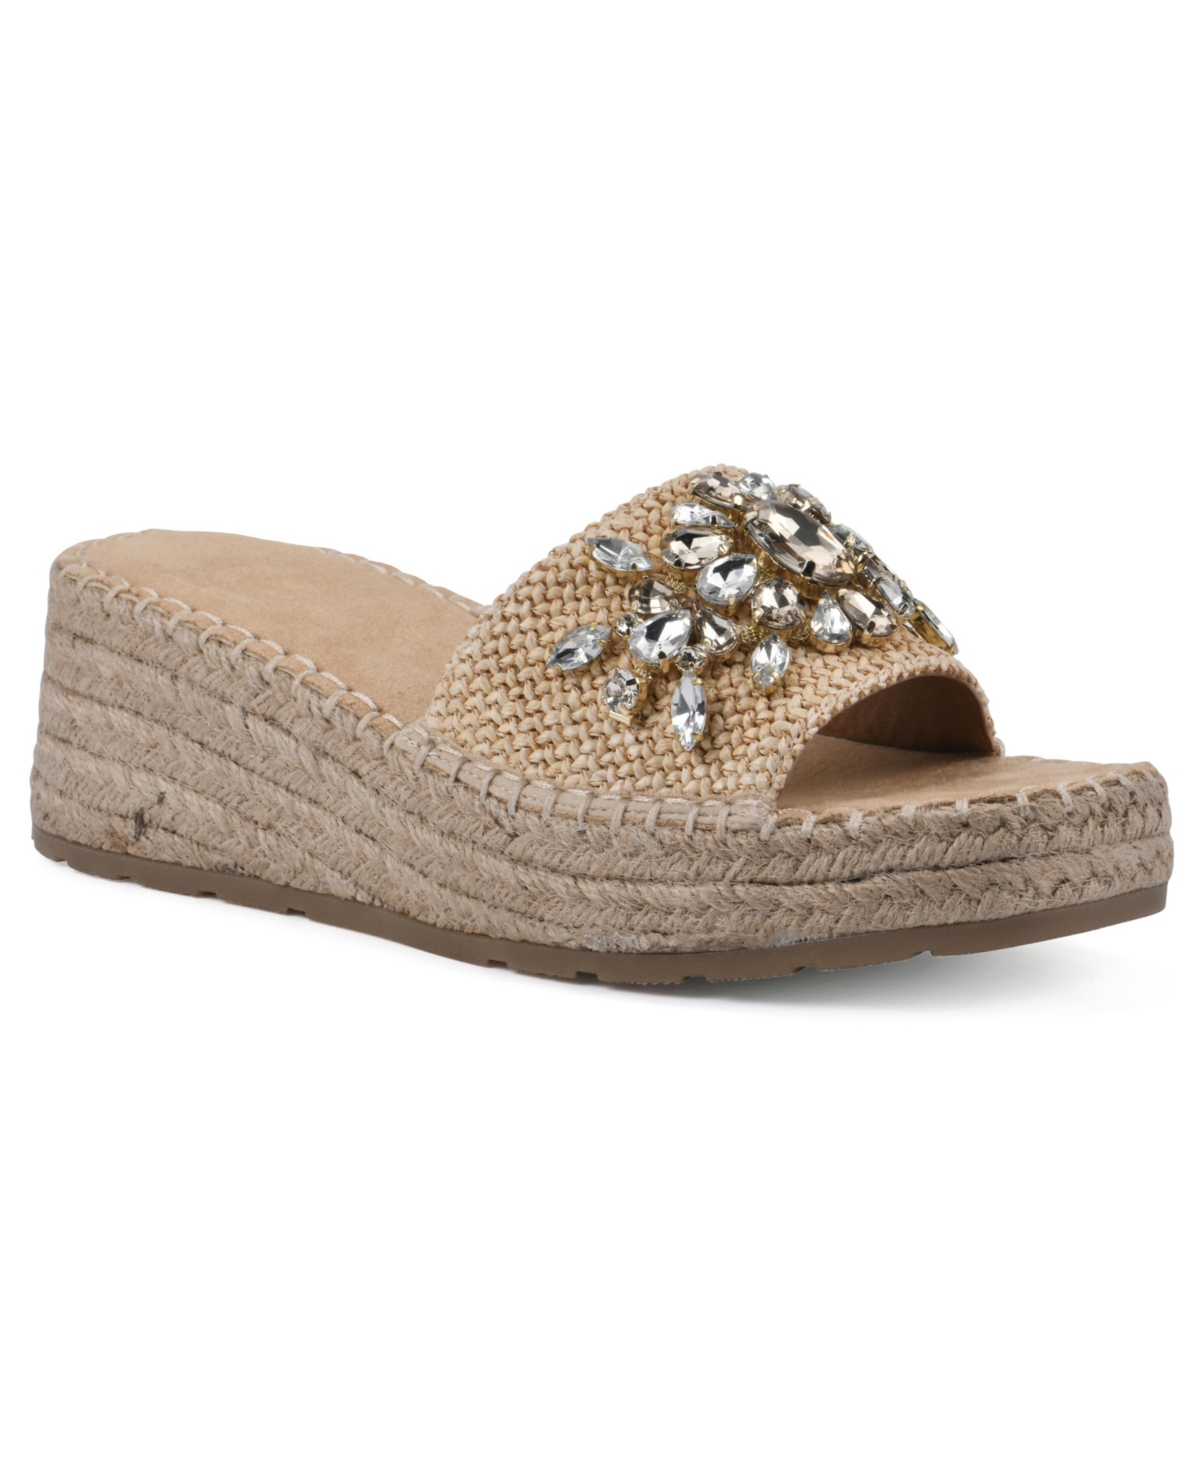 White Mountain Stitch Espadrille Wedge Sandals In Natural